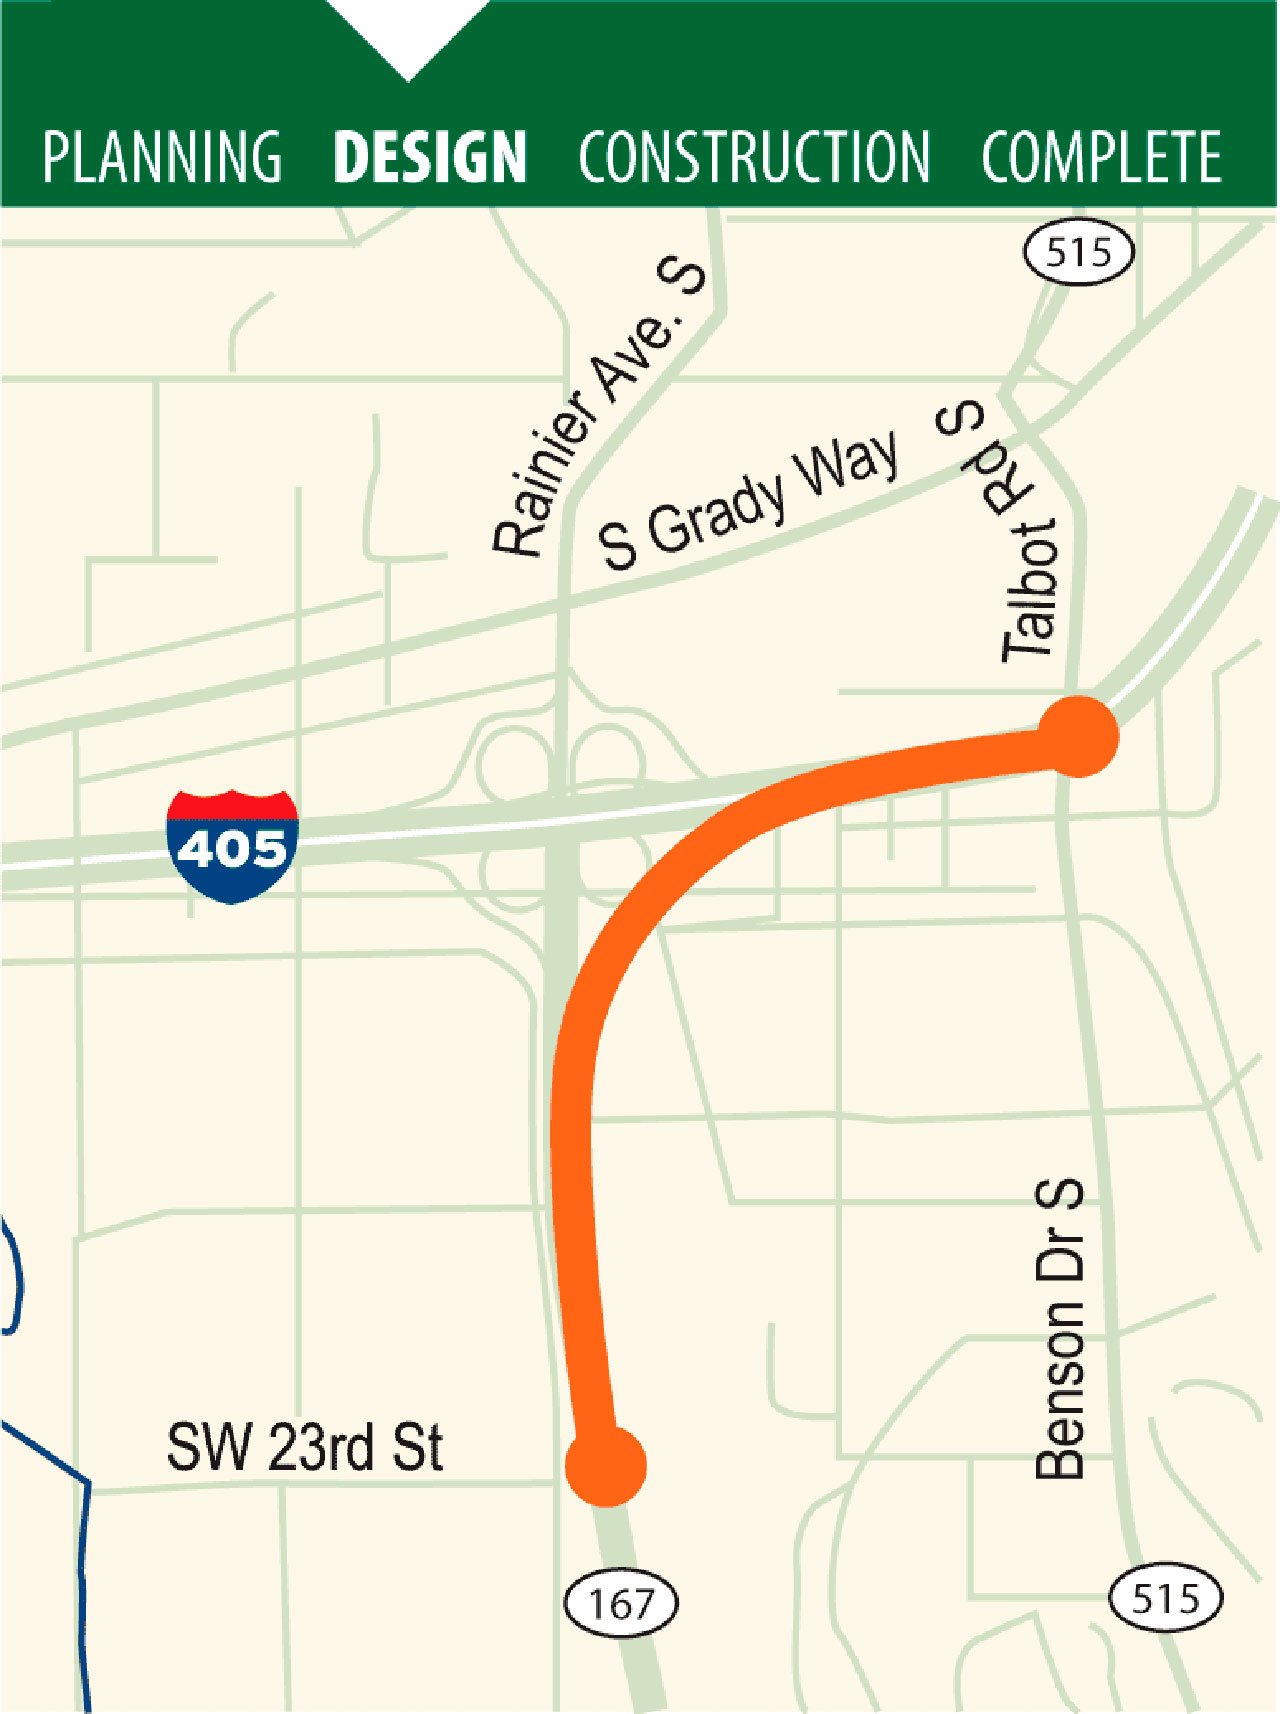 Through the I-405/SR 167 interchange project, crews will build a new flyover ramp connecting the HOT lanes on SR 167 to the carpool lanes on I-405 in Renton. This ramp will improve traffic flow and safety at this critical interchange. COURTESY MAP, WSDOT.